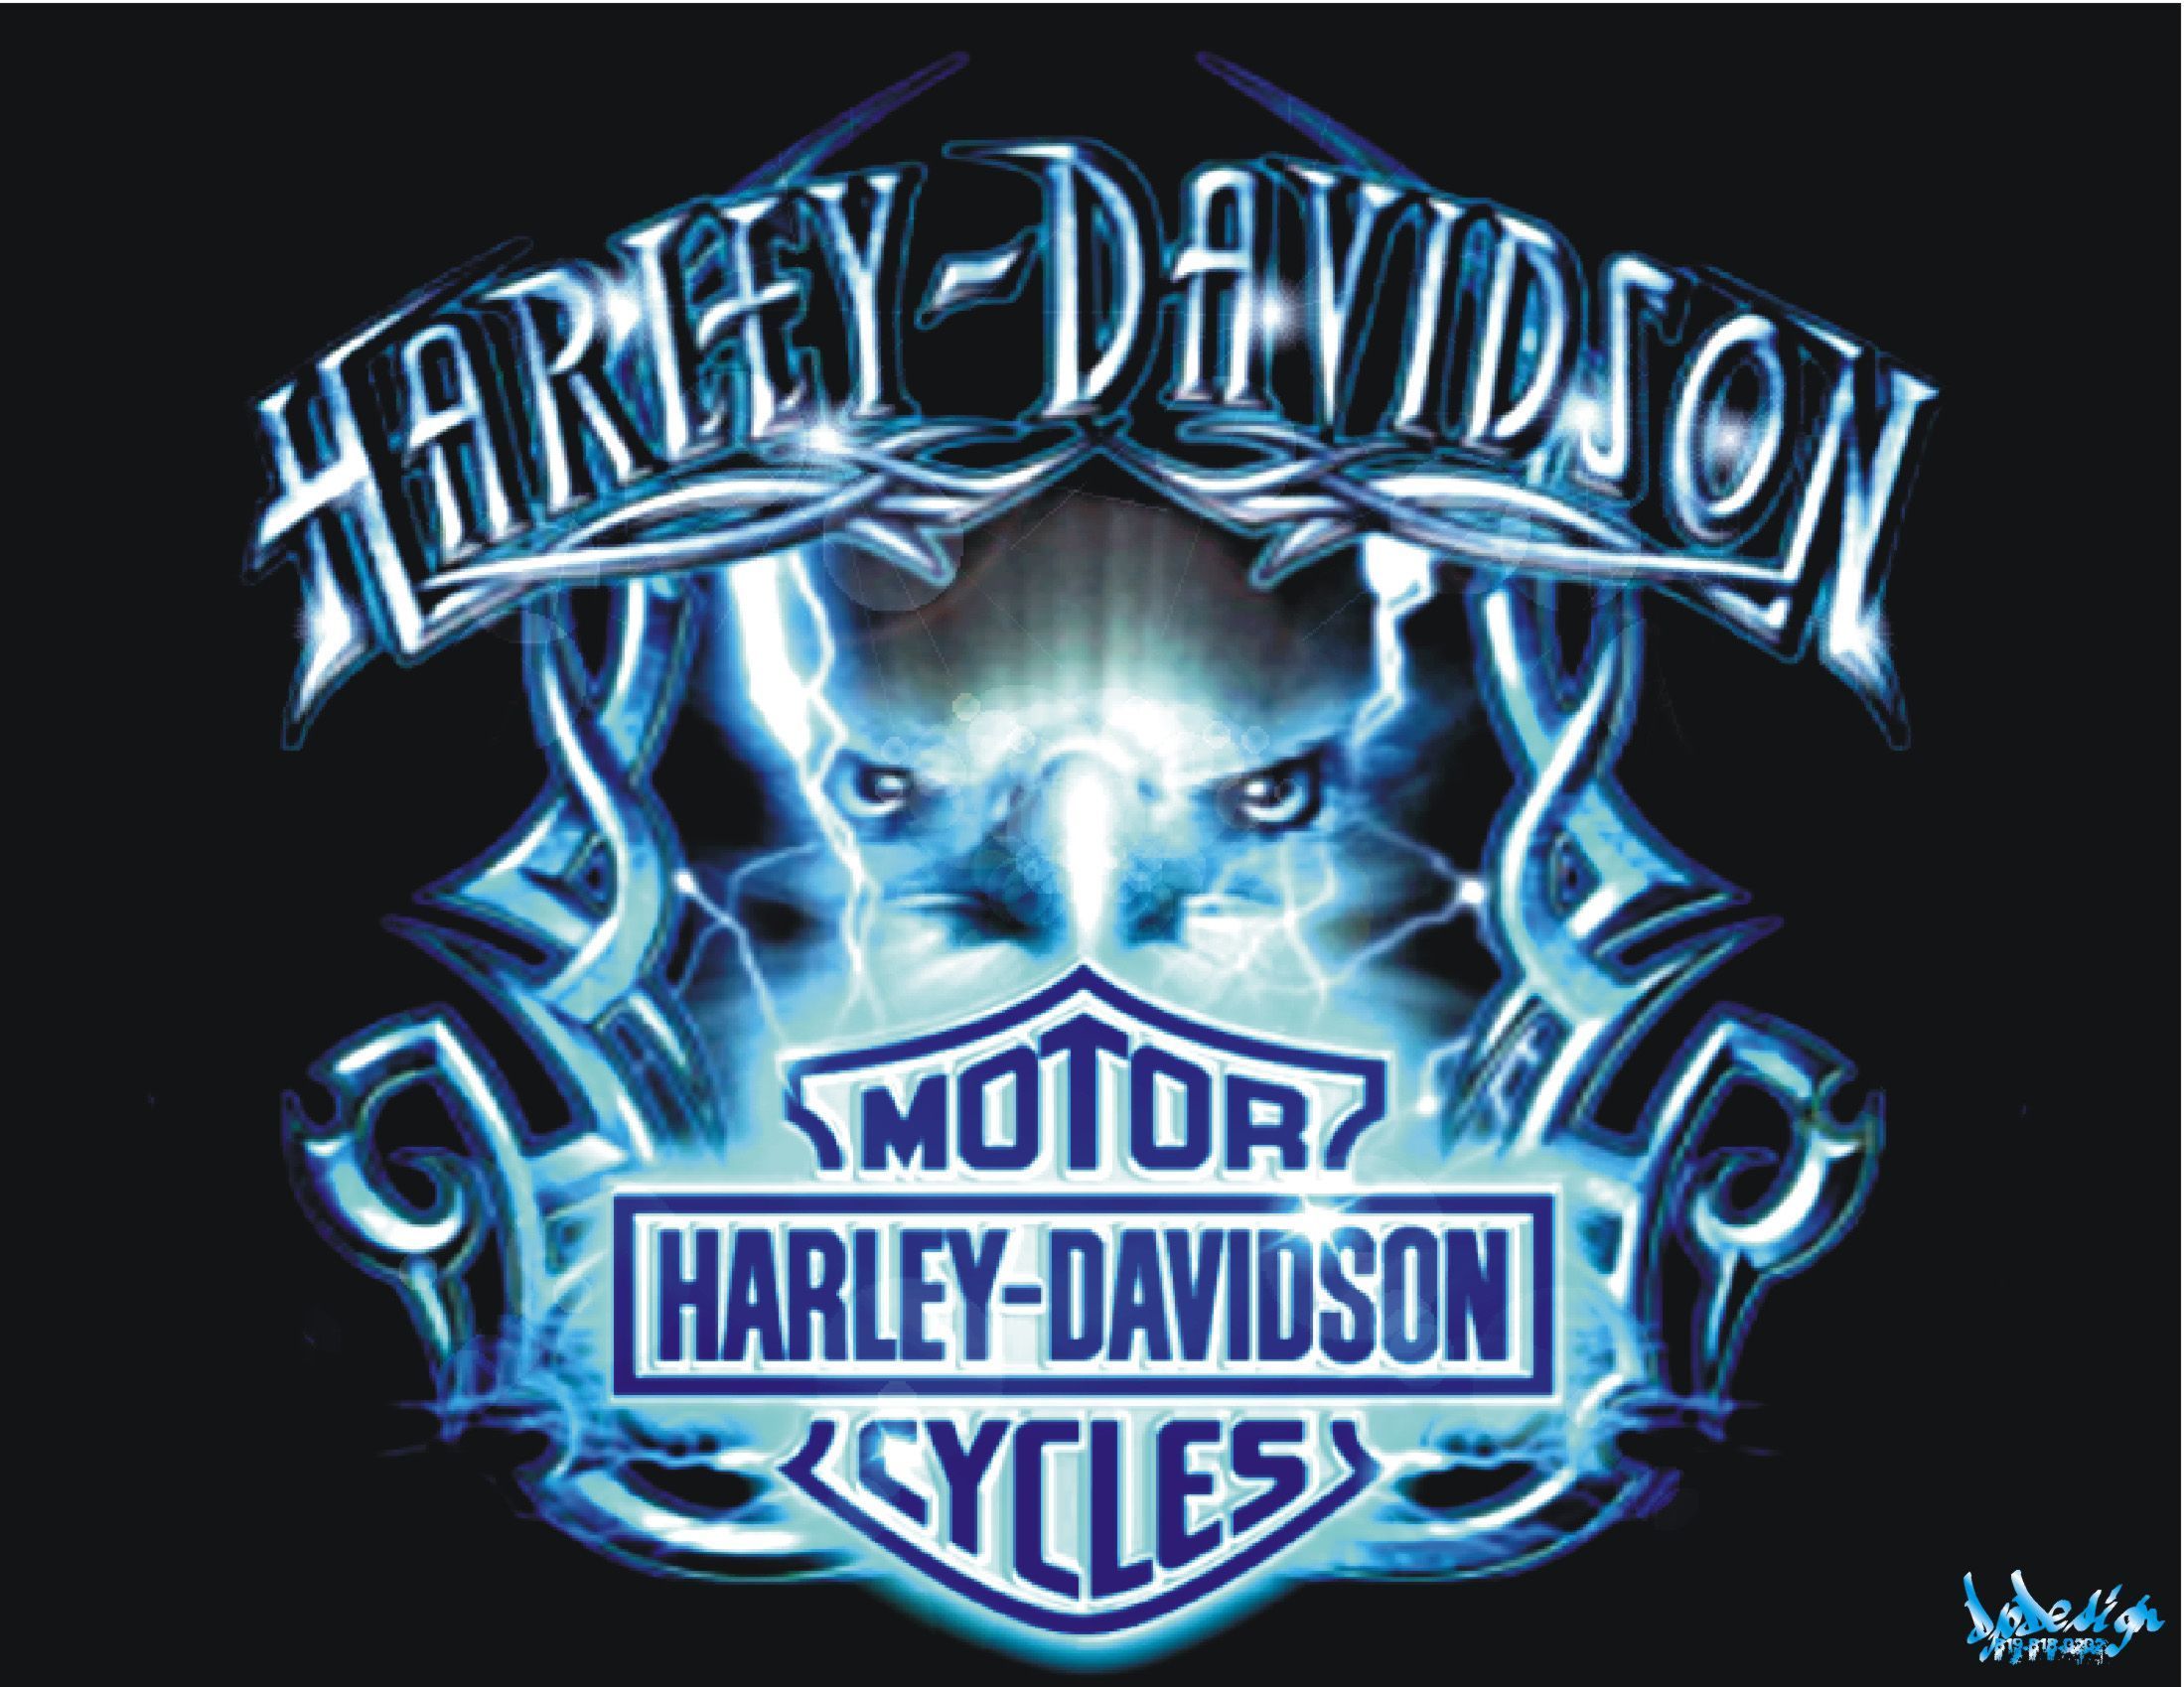 Free Harley Davidson Desktop Wallpaper | Best Review and Pictures 2016